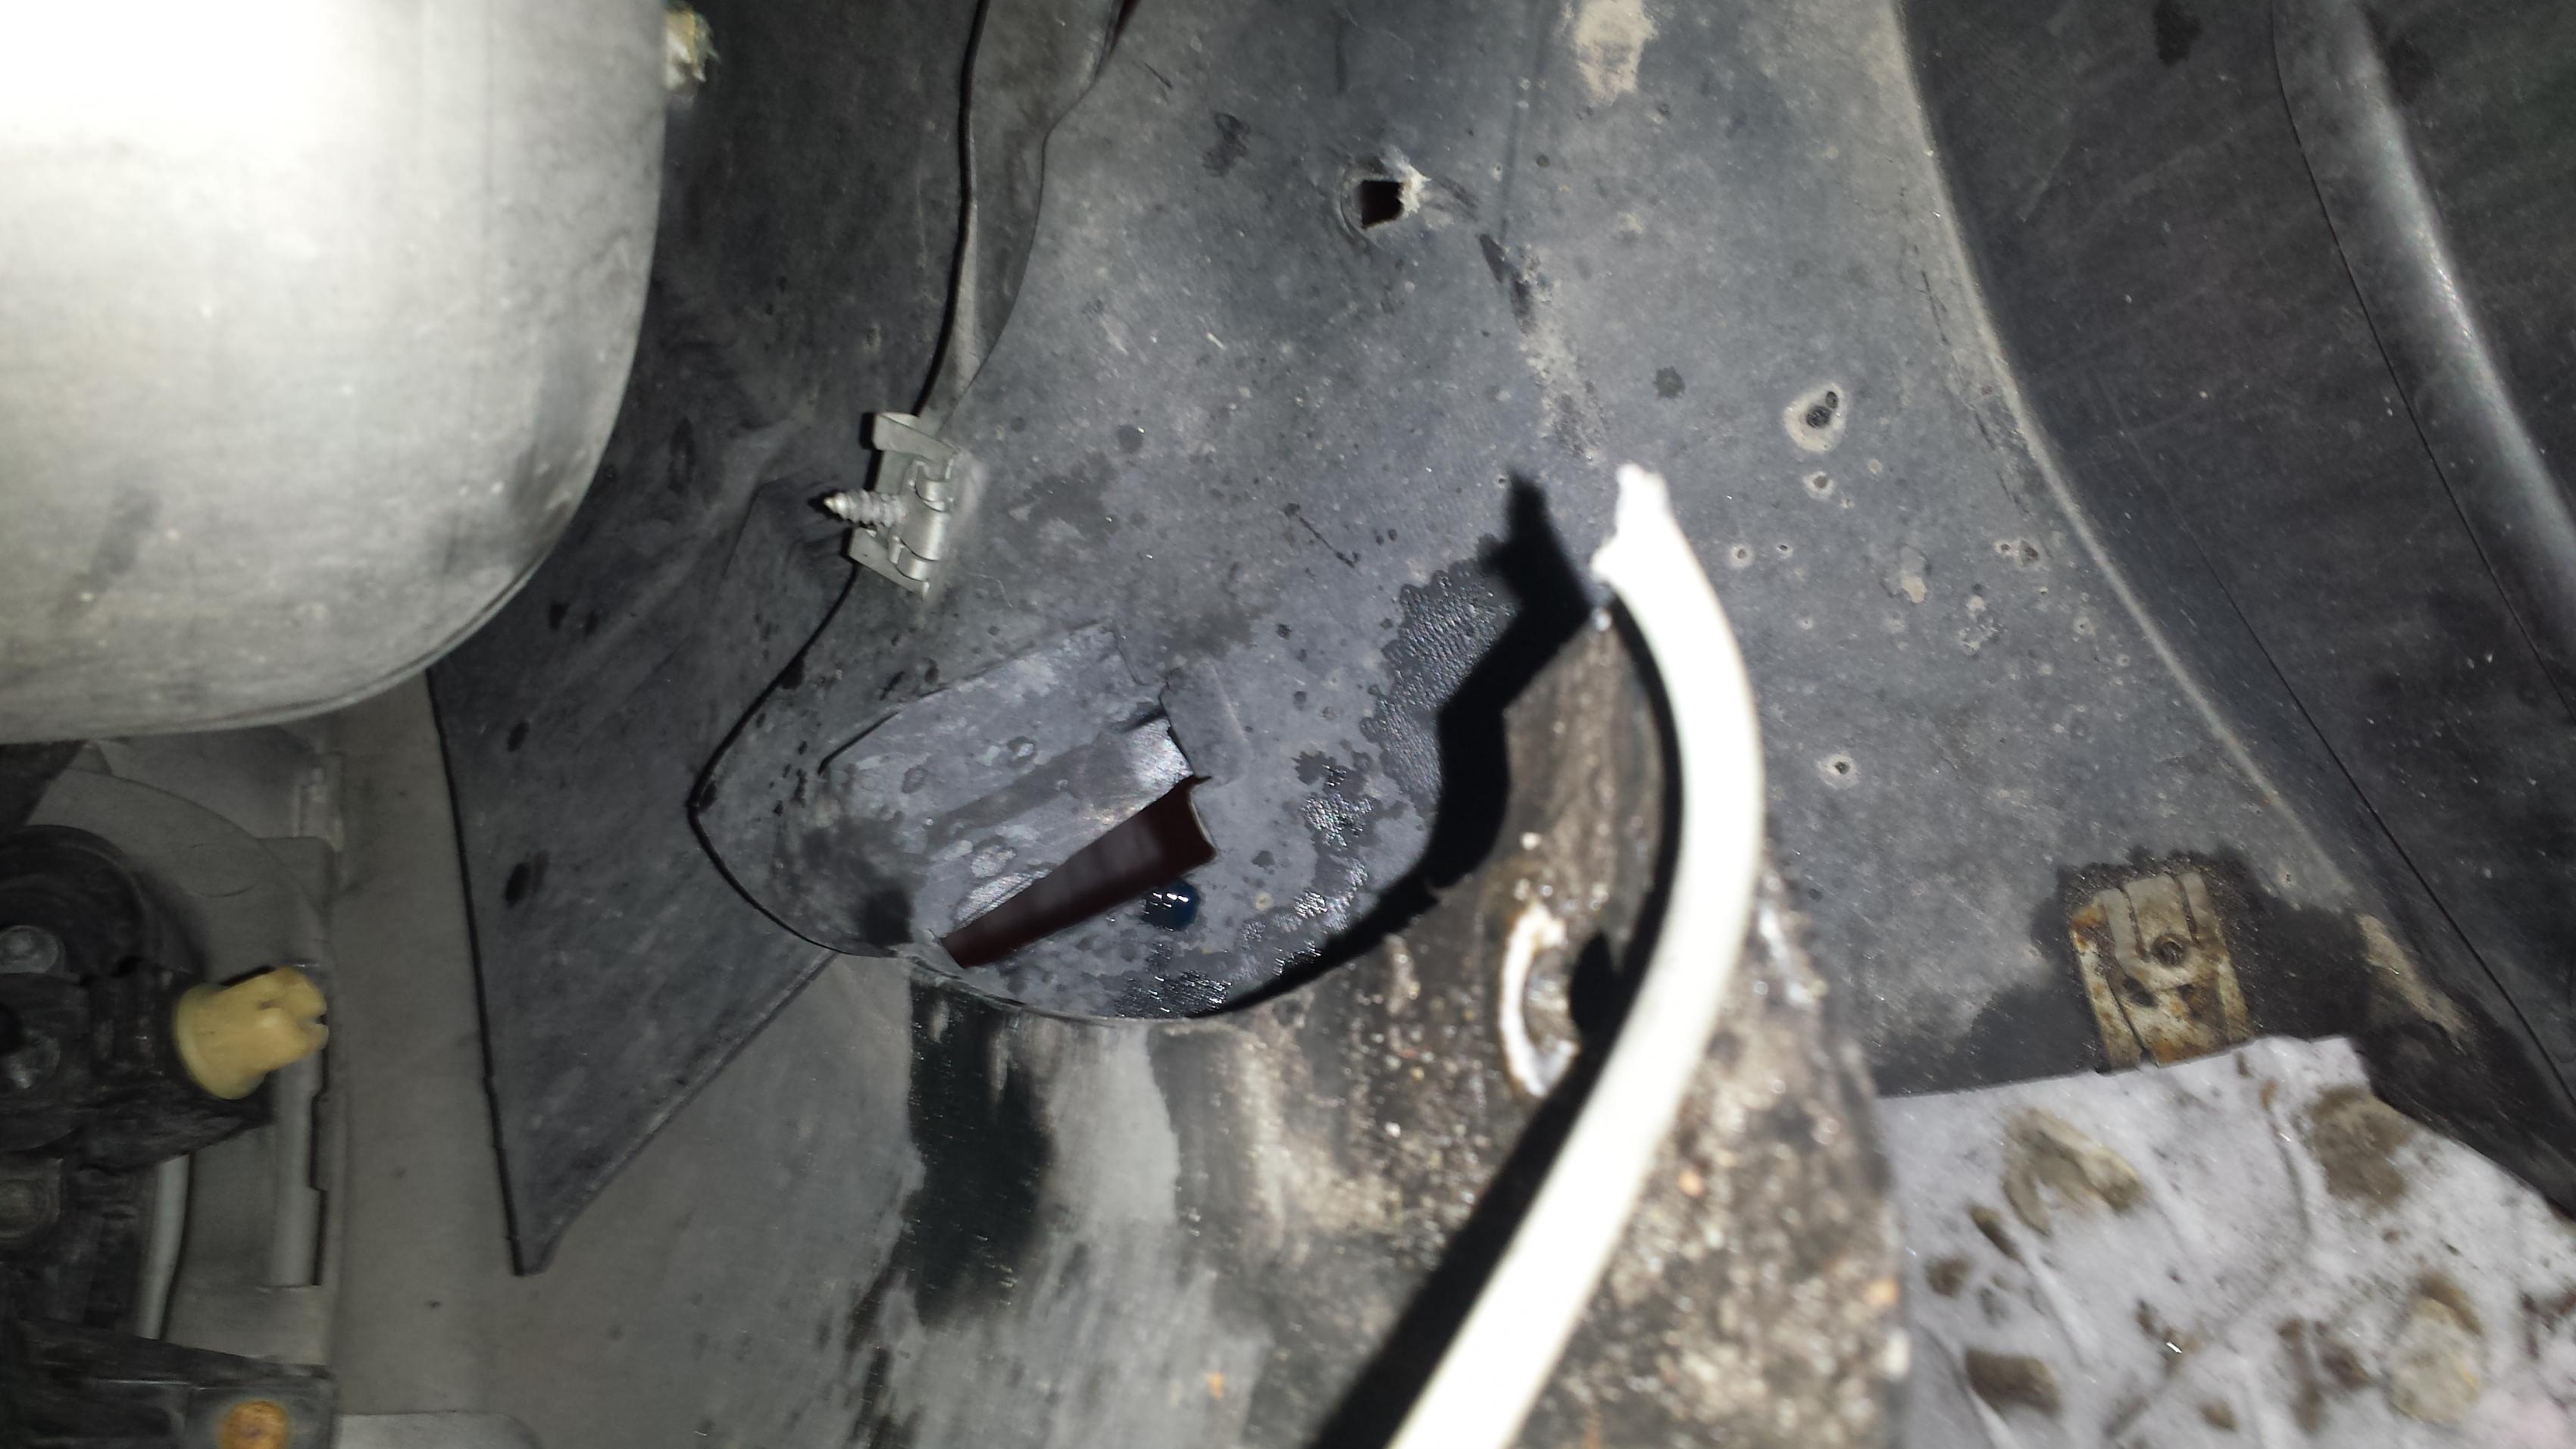 2007 s550 Airmatic Problems. Need help Finding Parts. - MBWorld.org Forums